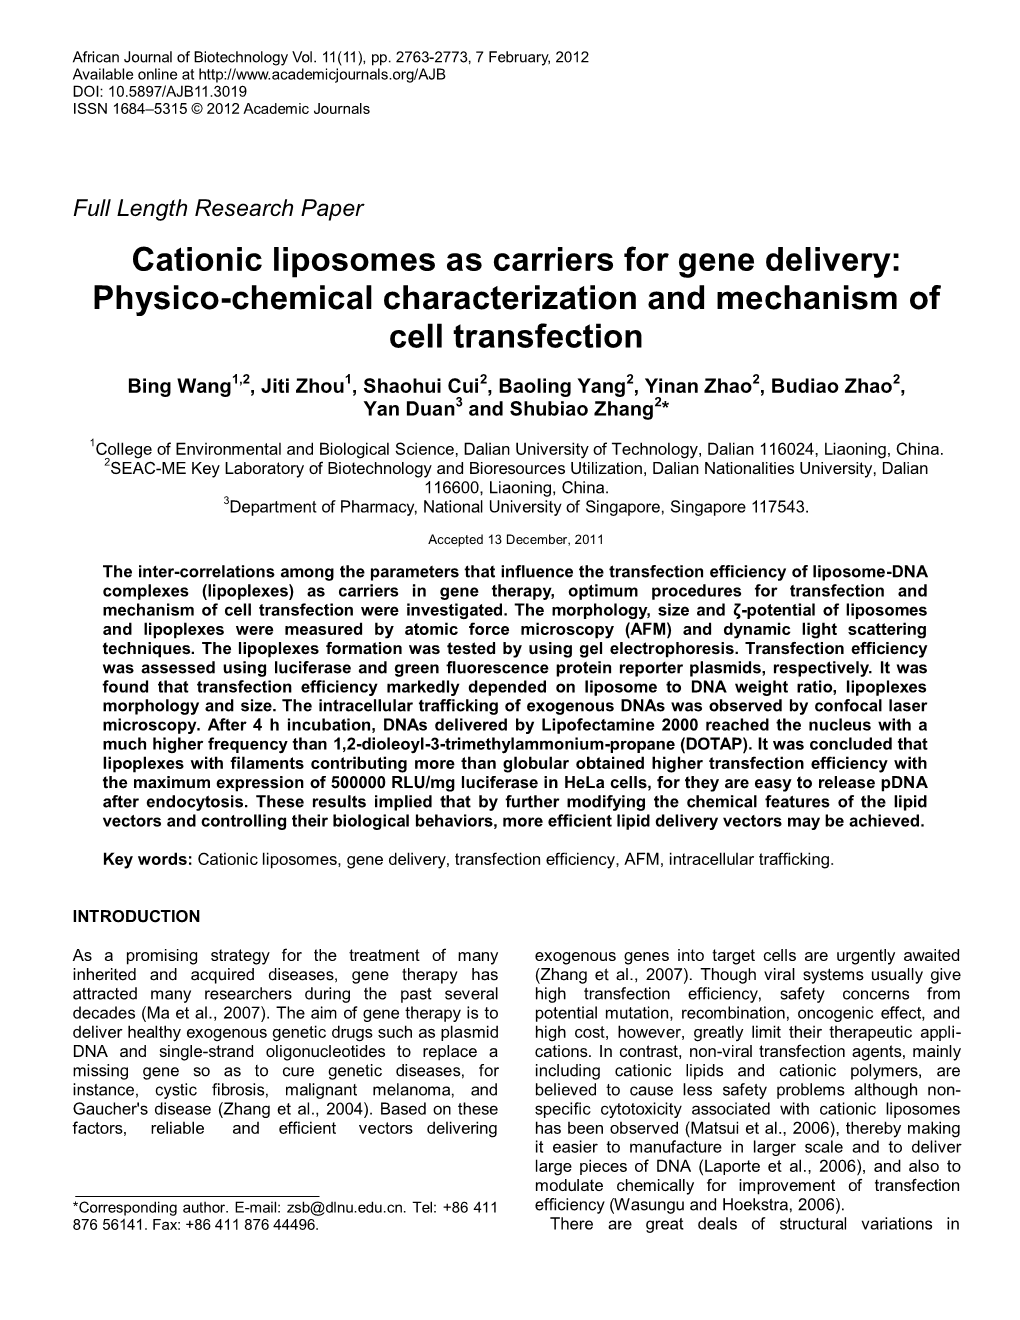 Cationic Liposomes As Carriers for Gene Delivery: Physico-Chemical Characterization and Mechanism of Cell Transfection